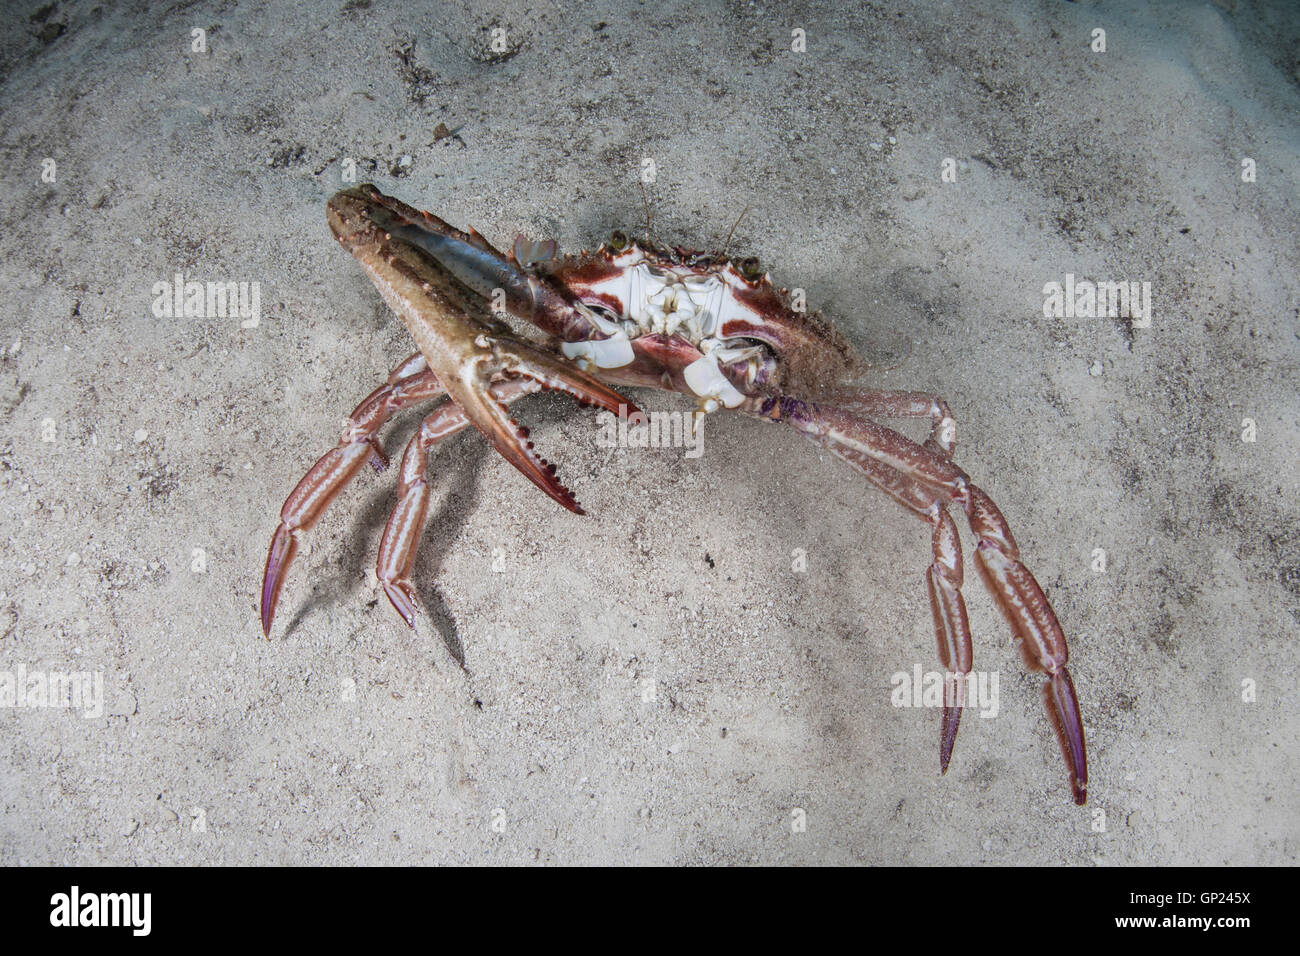 Hairy Clinging Crab, Mithrax spinosissimus, Turneffe Atoll, Caribbean, Belize Stock Photo